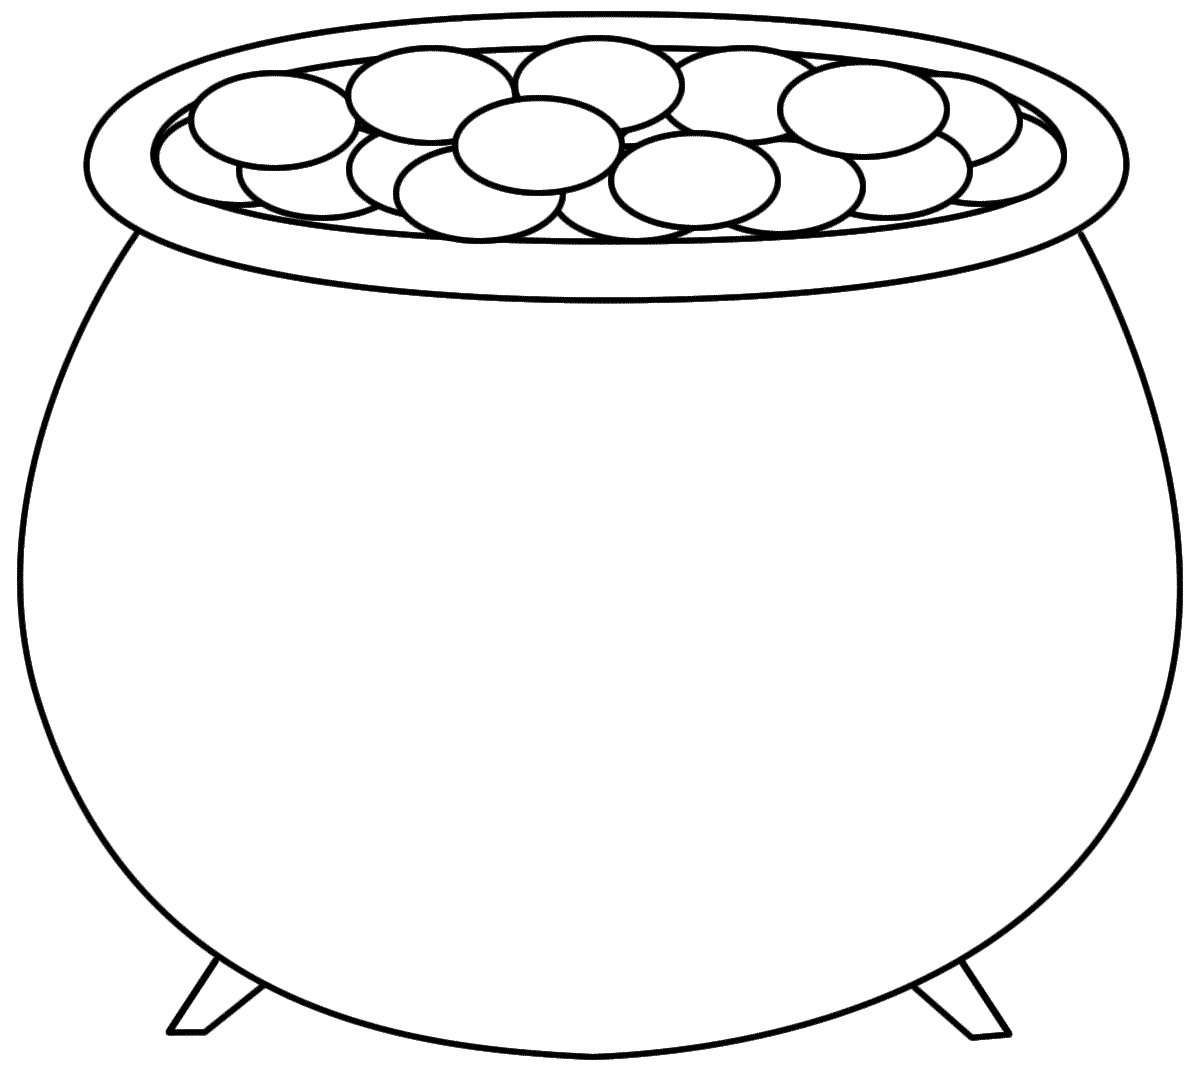 Rainbow Pot Of Gold Coloring Page Clipart Panda Free Clipart